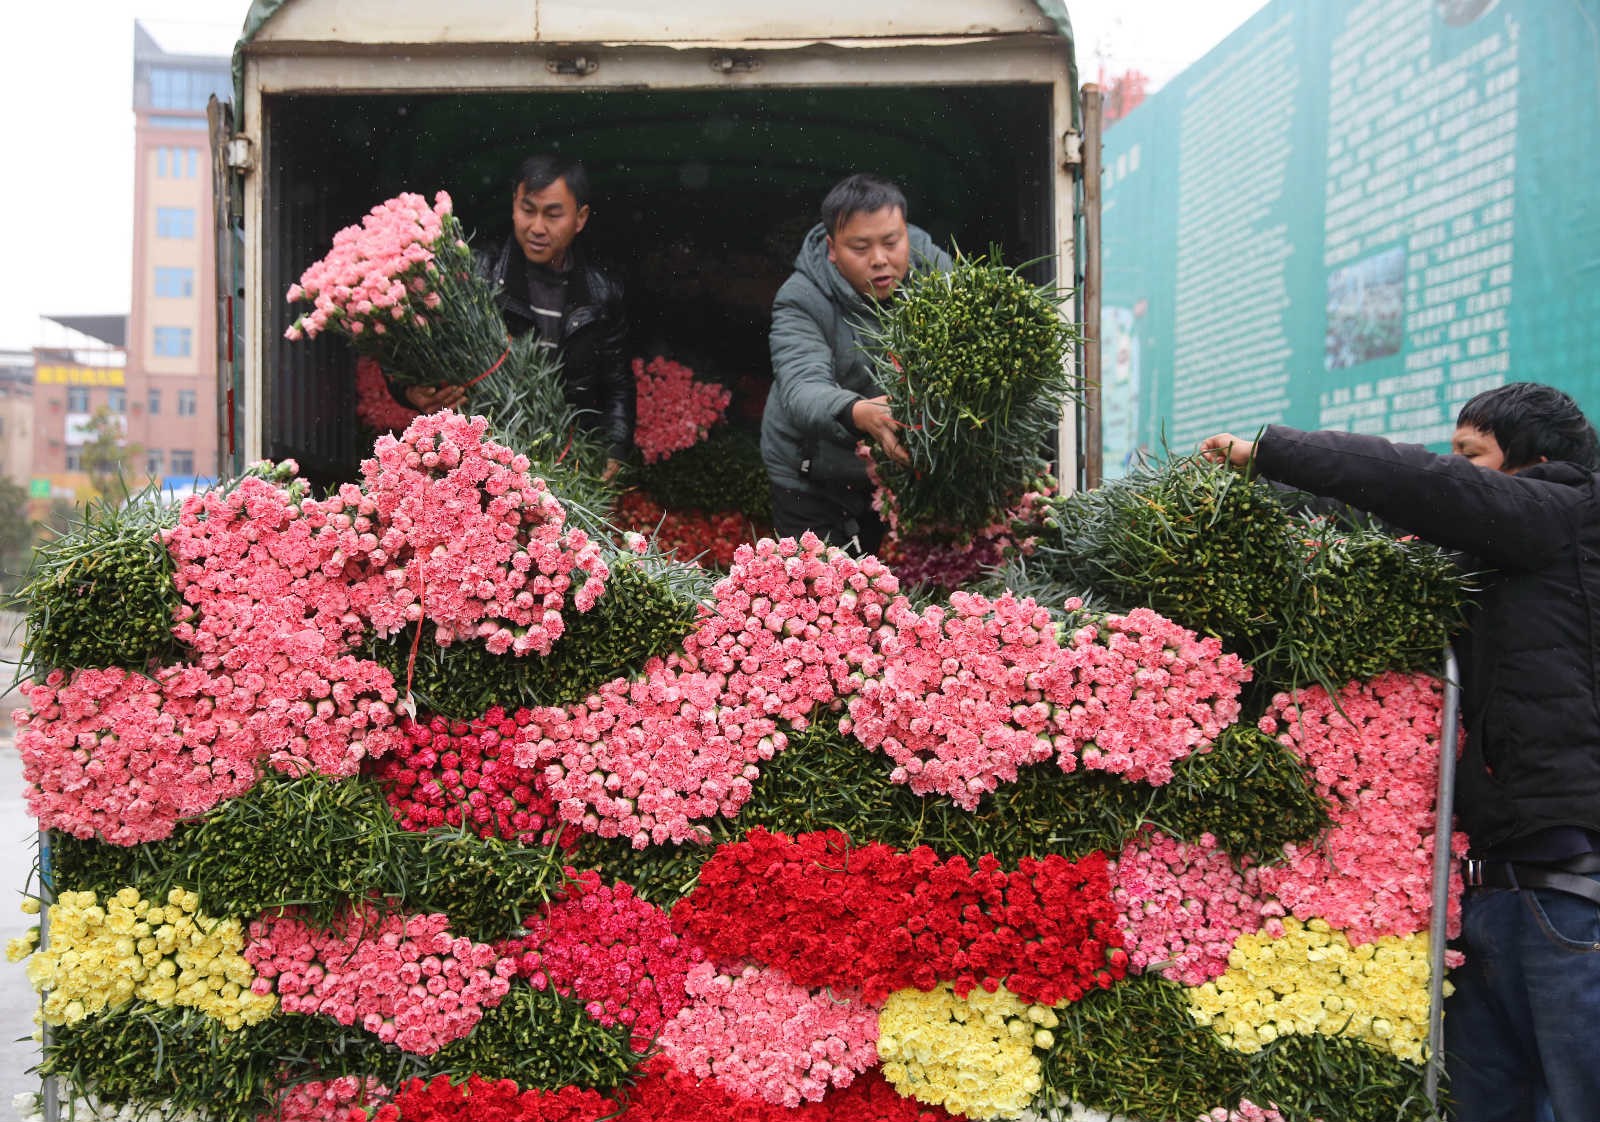 Photo taken on Feb. 9, shows florists preparing fresh flowers at Kunming Dounan Flower Market in Kunming, capital of southwest China’s Yunnan province. (People’s Daily Online/Liang Zhiqiang)